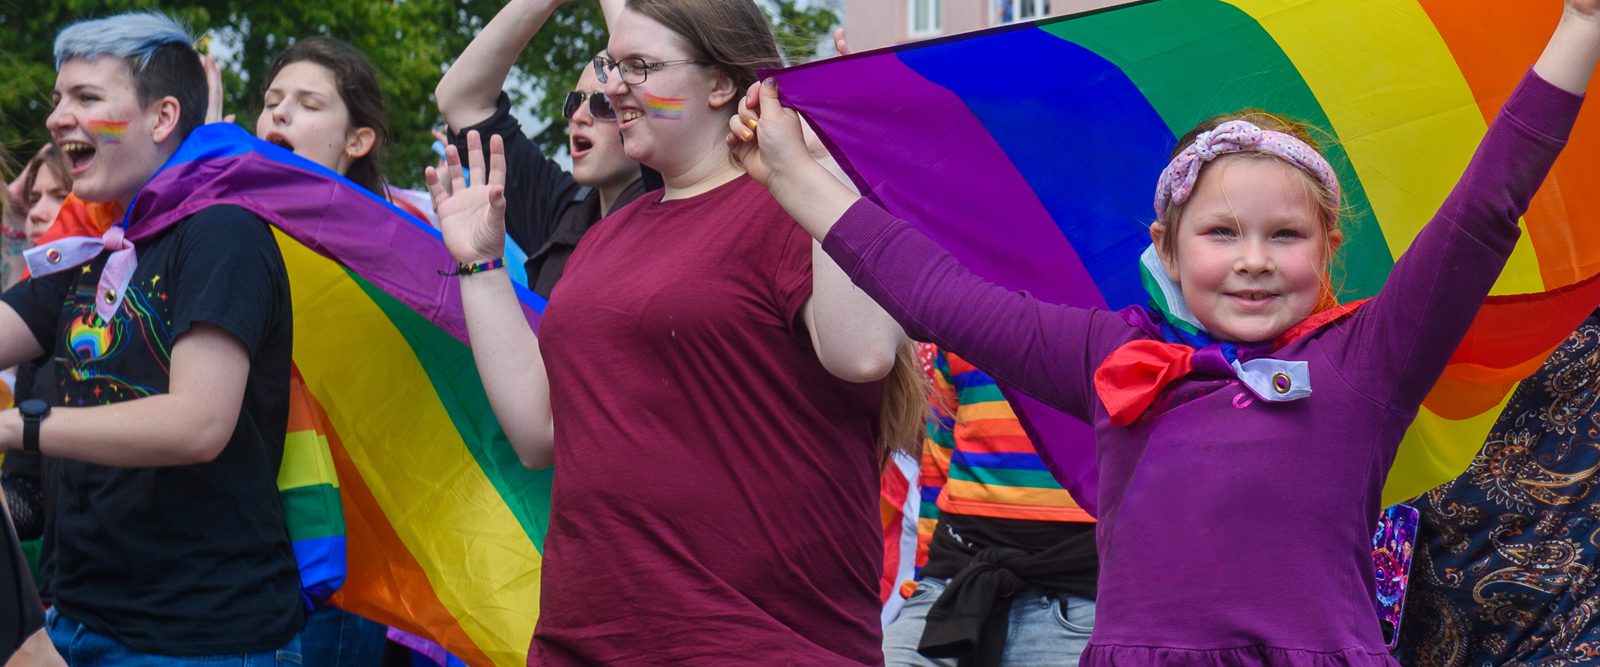 People smiling and waving rainbow flags.